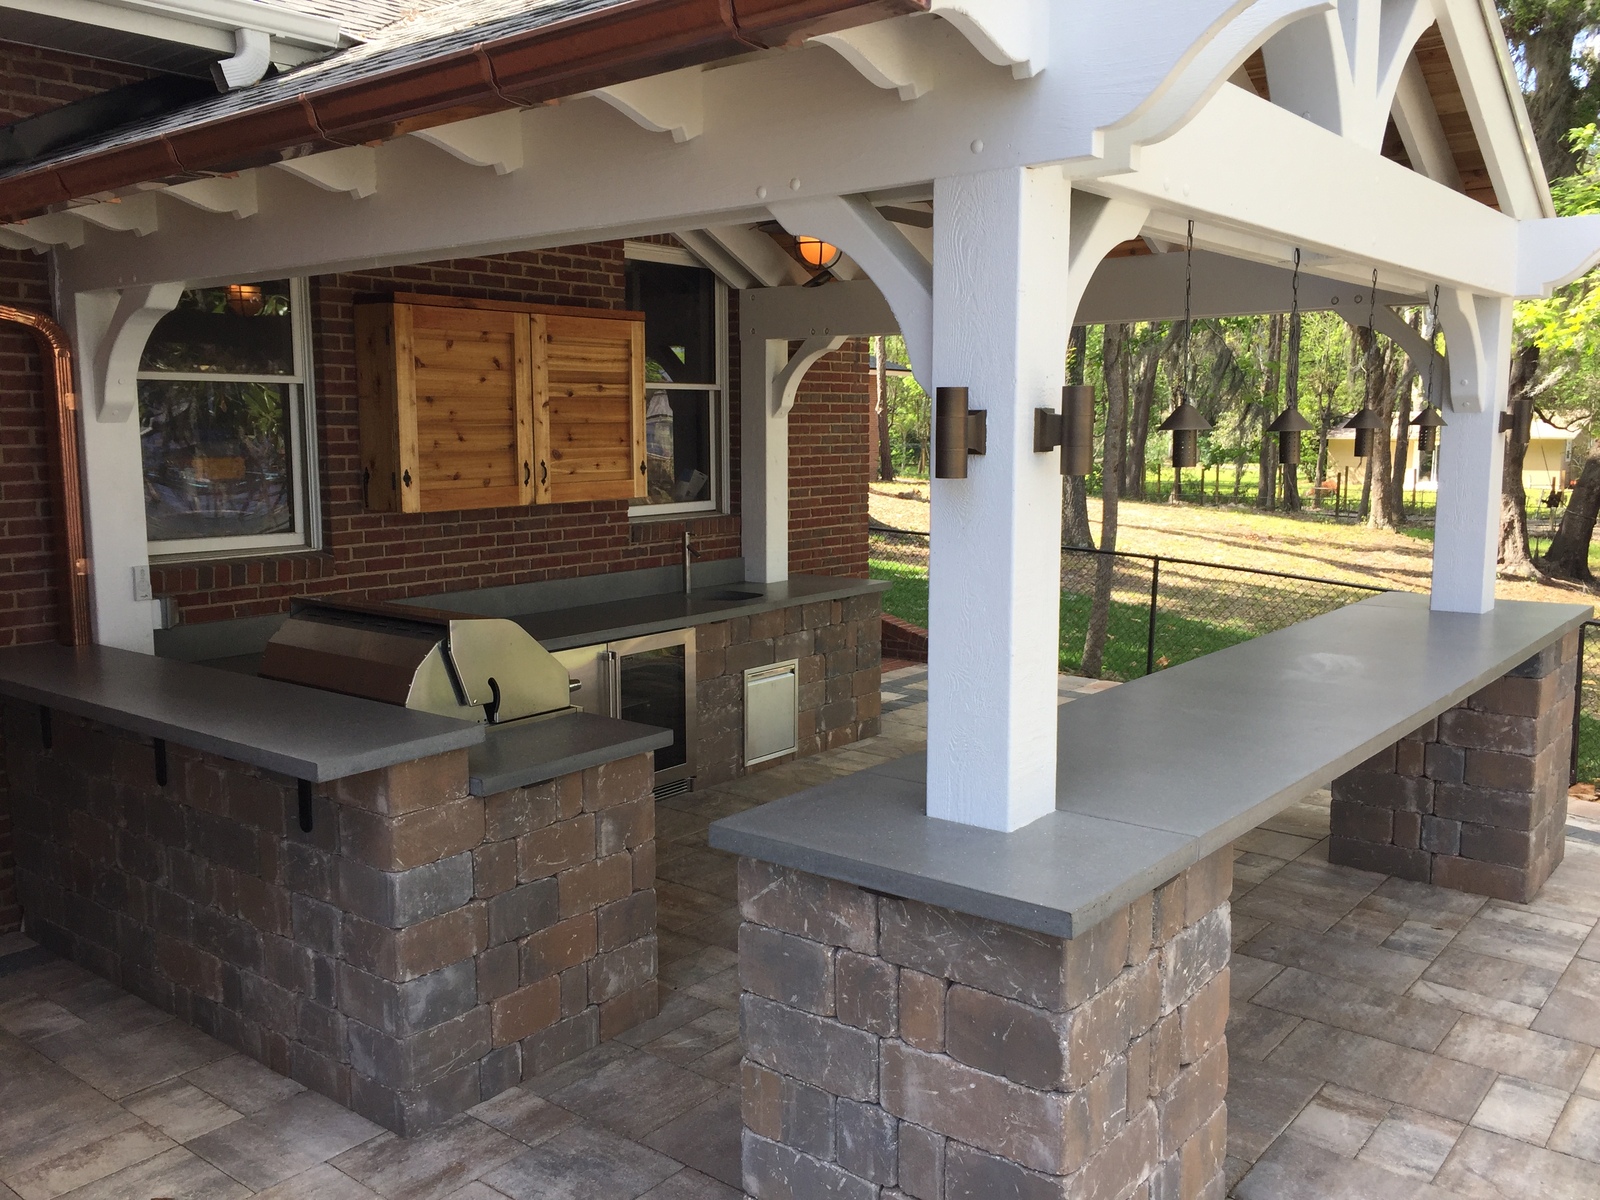 XL Floating Bar top with Summer Kitchen Tops